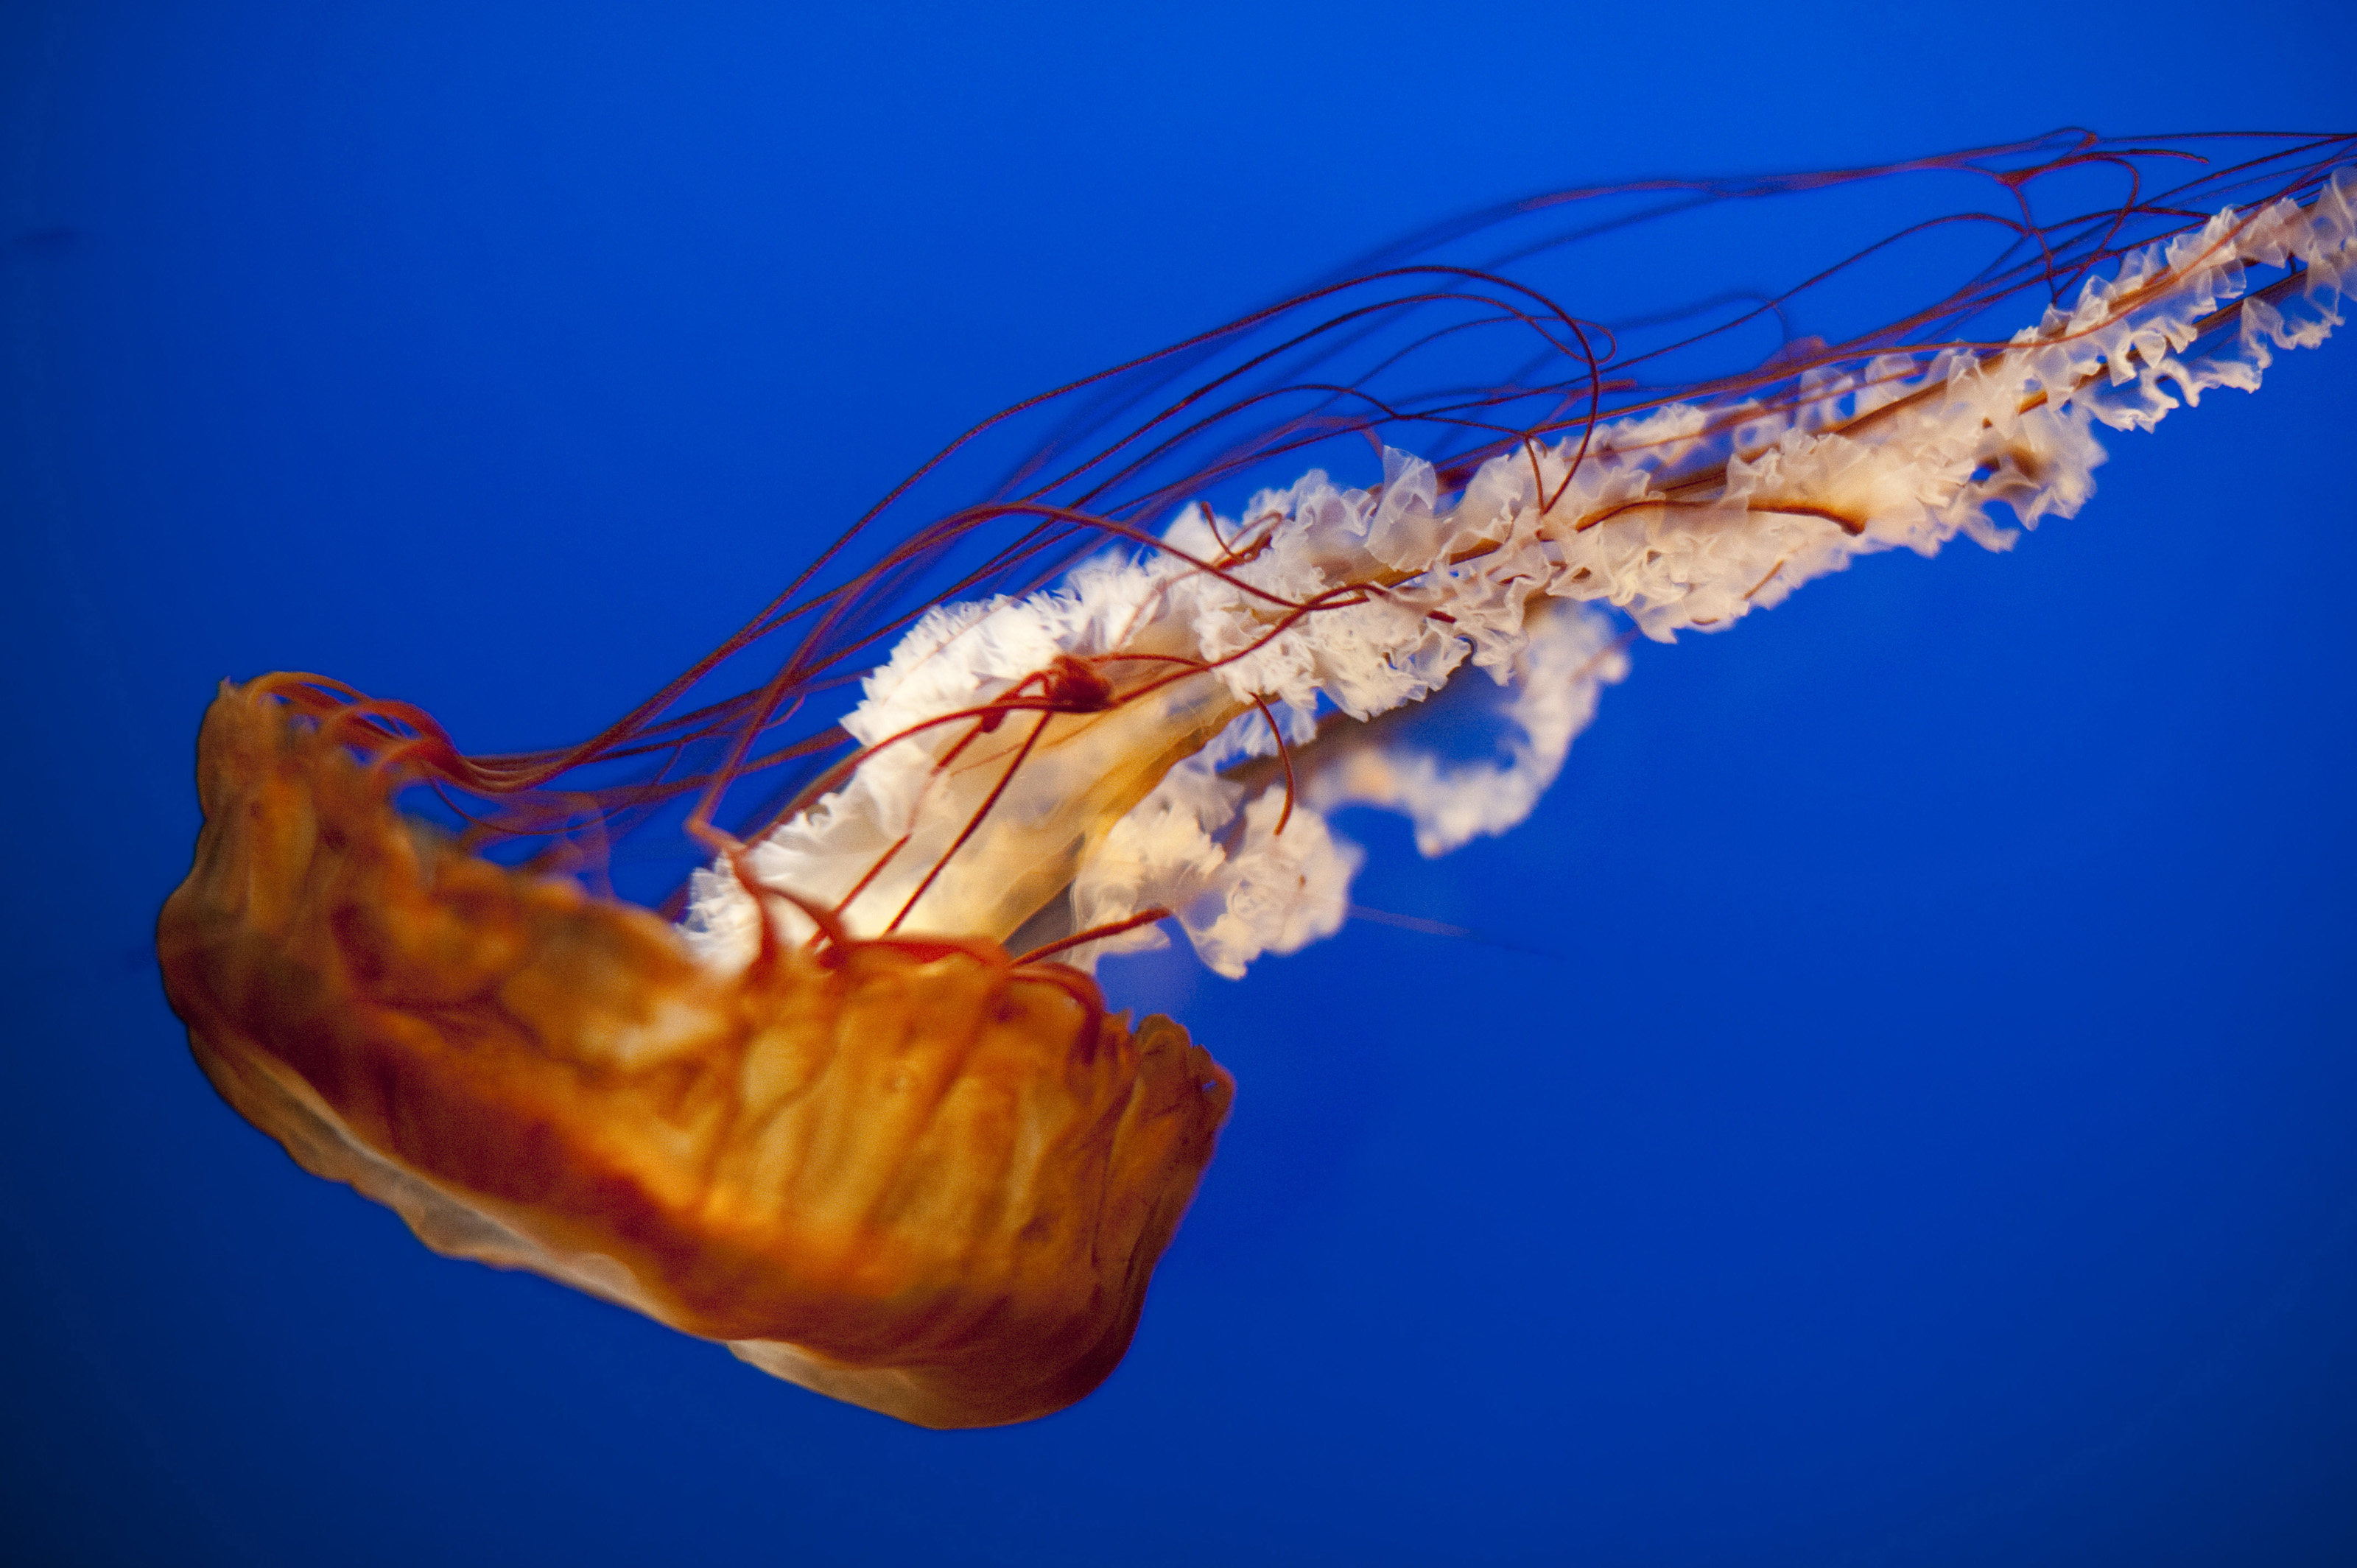 jellyfish tentacles-6741 | Stockarch Free Stock Photos